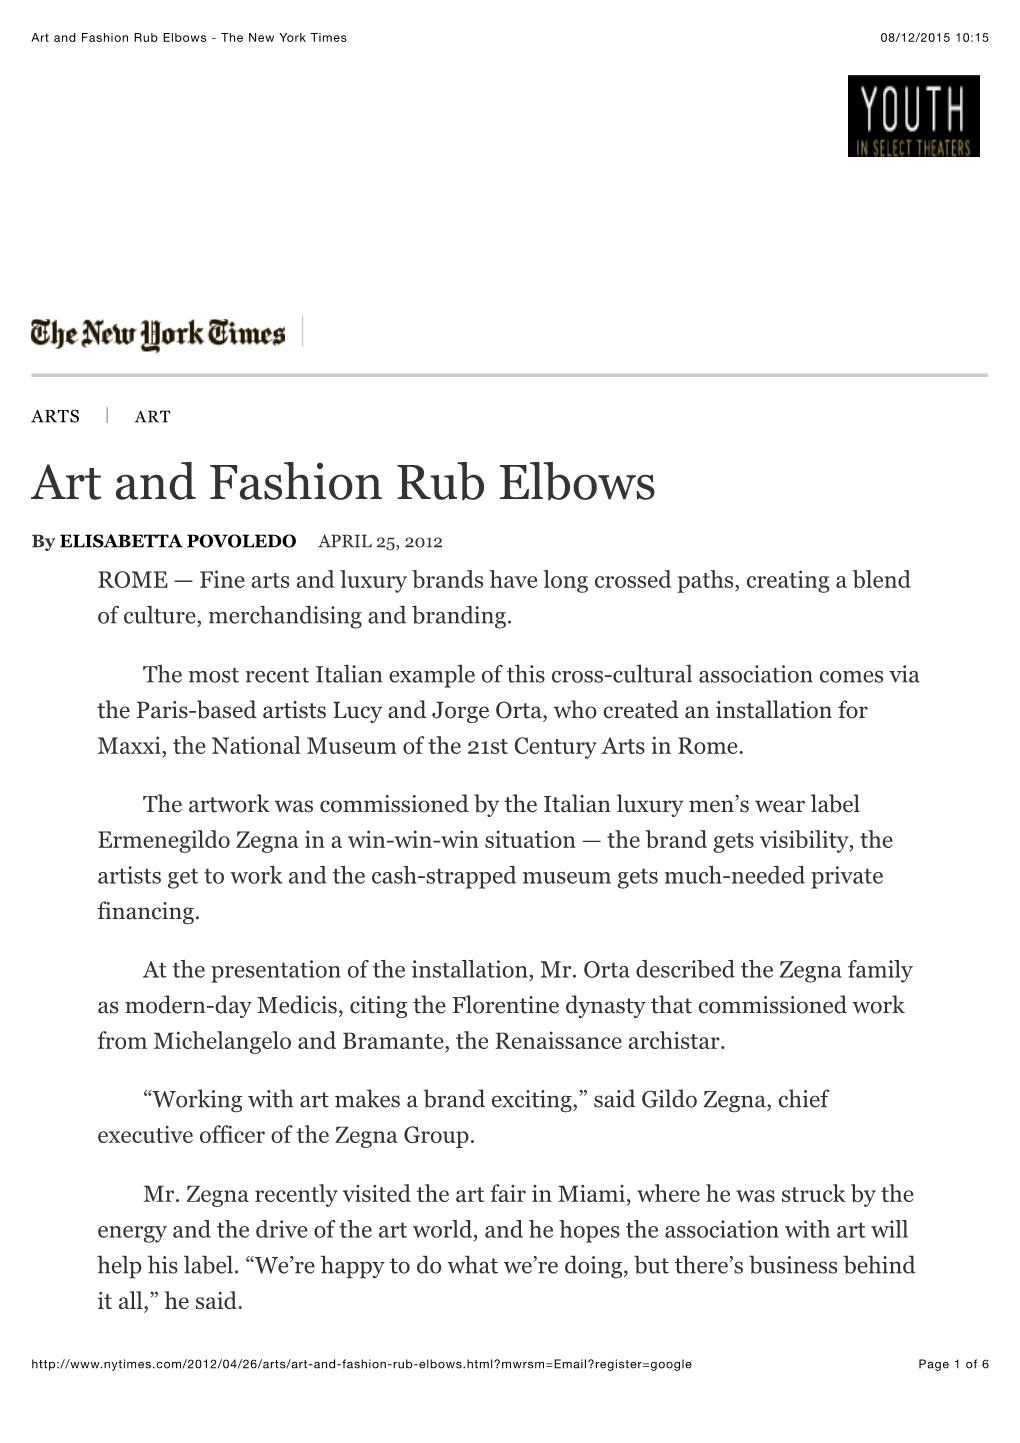 The New York Times 08/12/2015 10:15